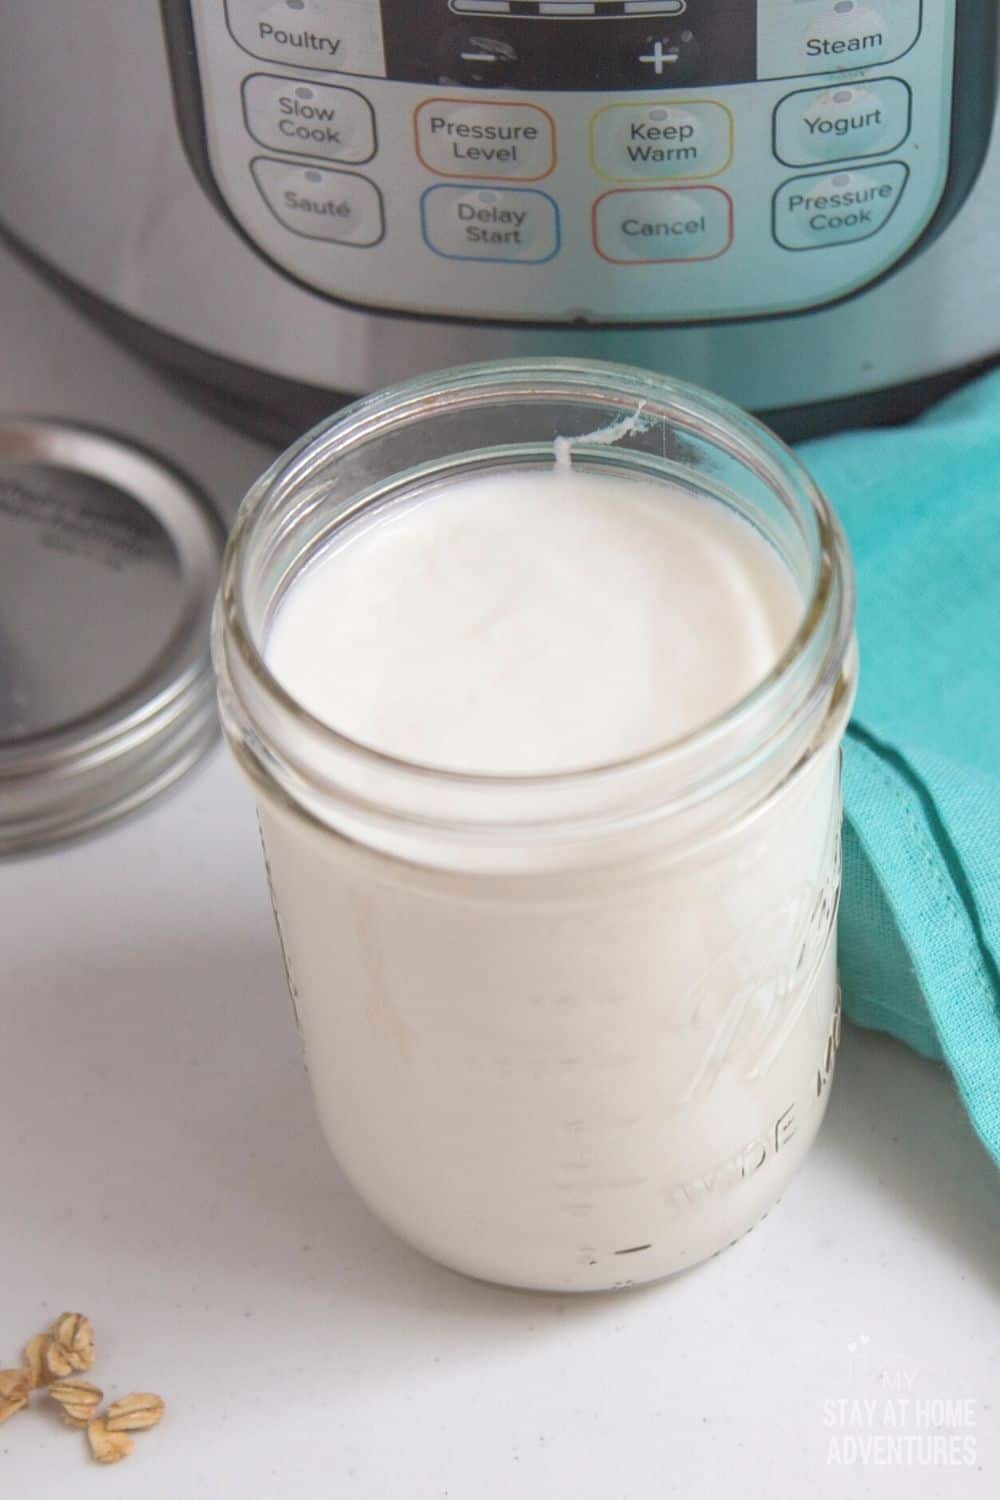 Want to try making vanilla yogurt using your Instant Pot? Learn everything you need about making yogurt using an electric pressure cooker. via @mystayathome